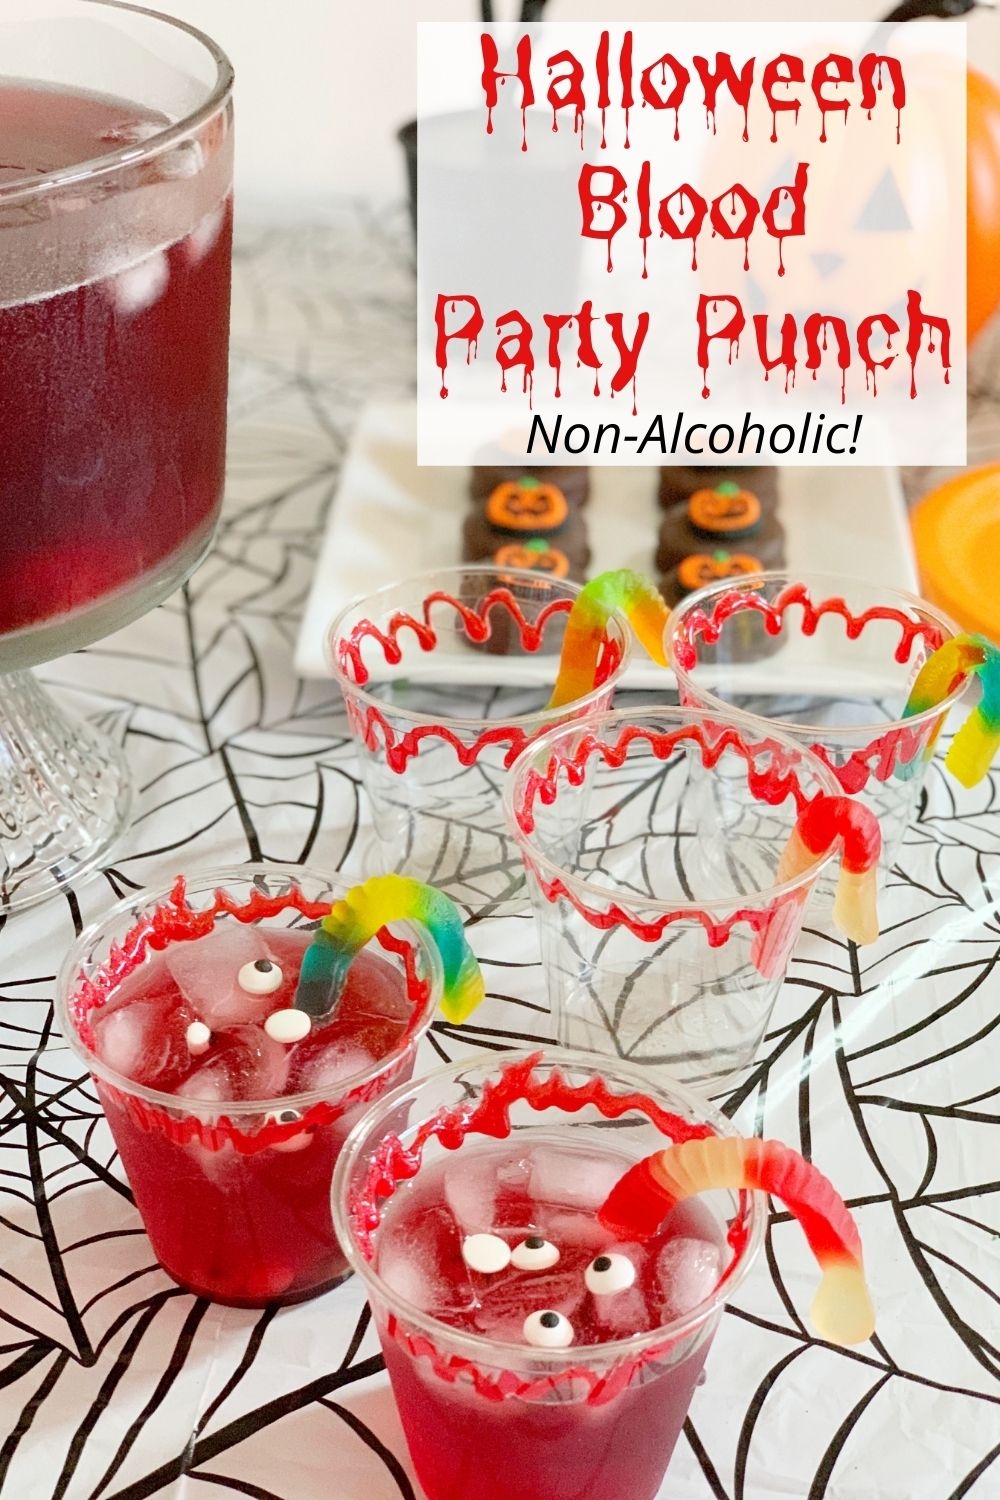 Non-Alcoholic Halloween Party Punch Recipe For Kids